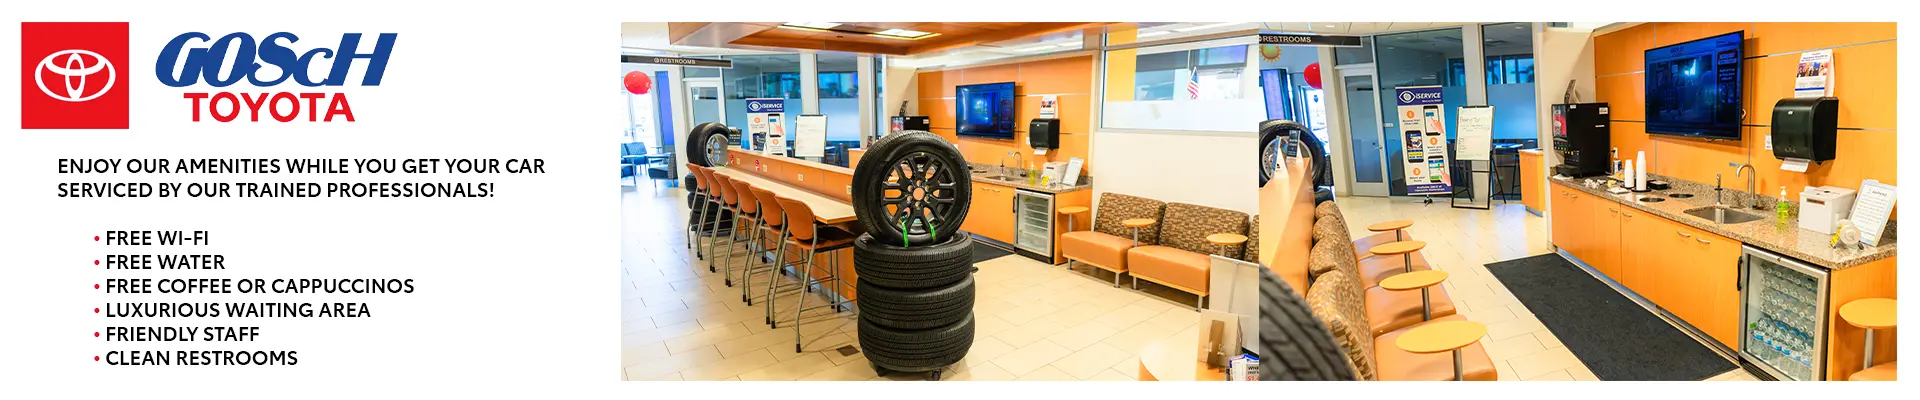 Gosch Toyota - Enjoy Our Amenities While You Get Your Car Serviced by Our Trained Professionals